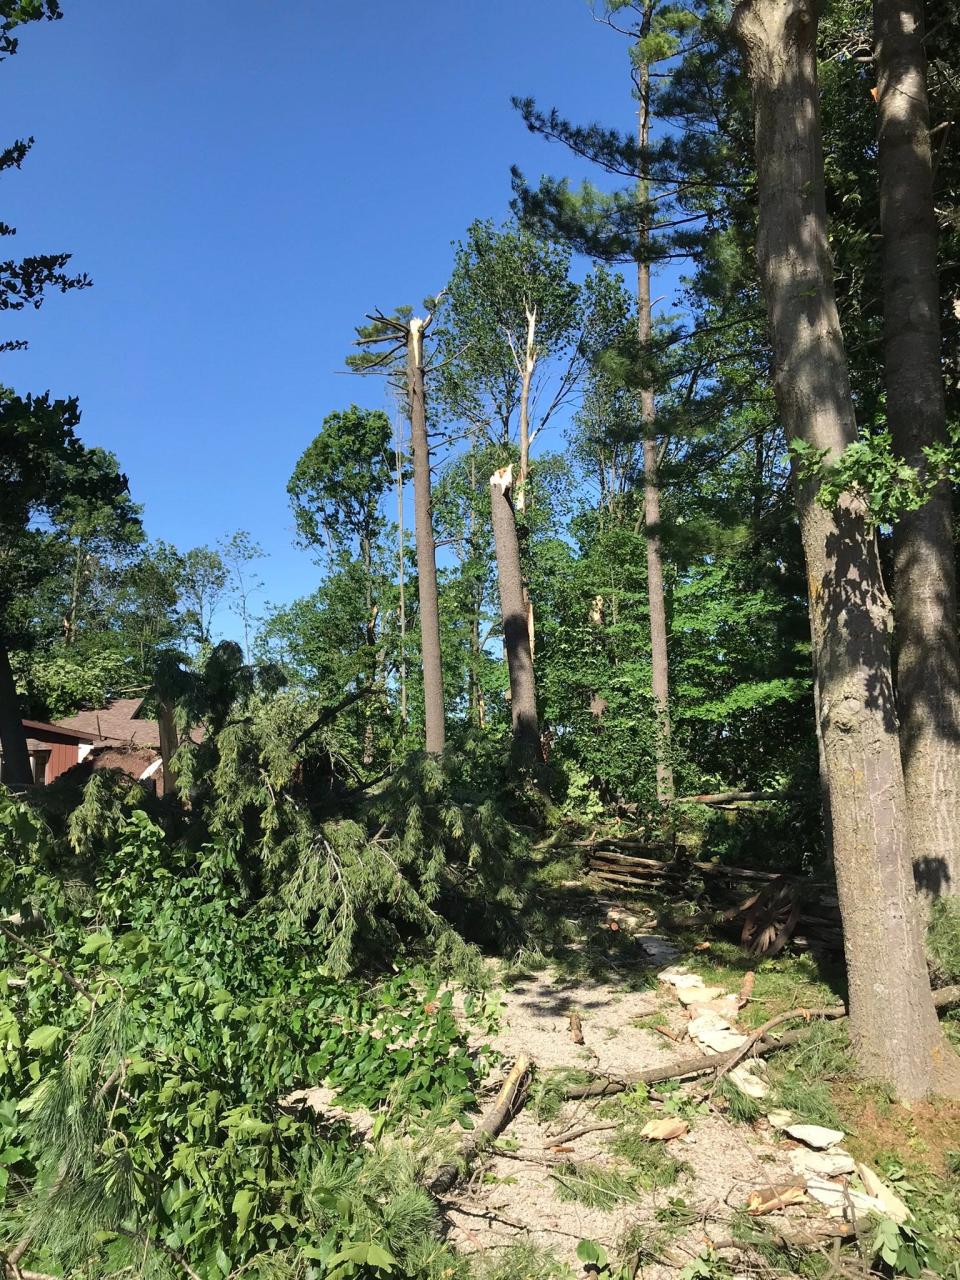 Downed trees at around 9 a.m. on June 16, 2022 in Black Creek, Wis.